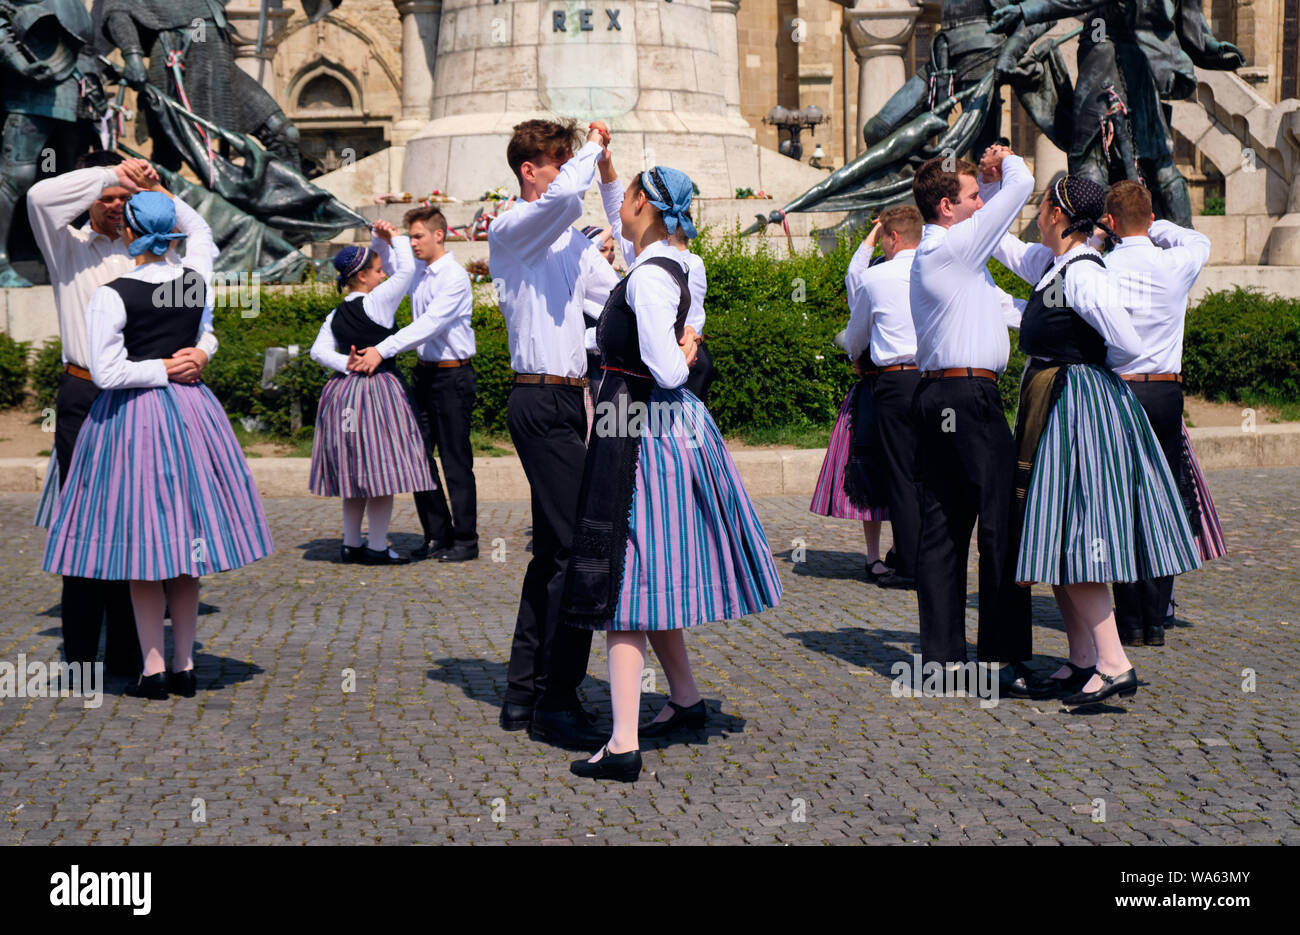 Hungarian Traditional dance troop in folkloric customs with a public performance in square. Dancer performing in pairs, man leading.  Cluj, Romania, Stock Photo